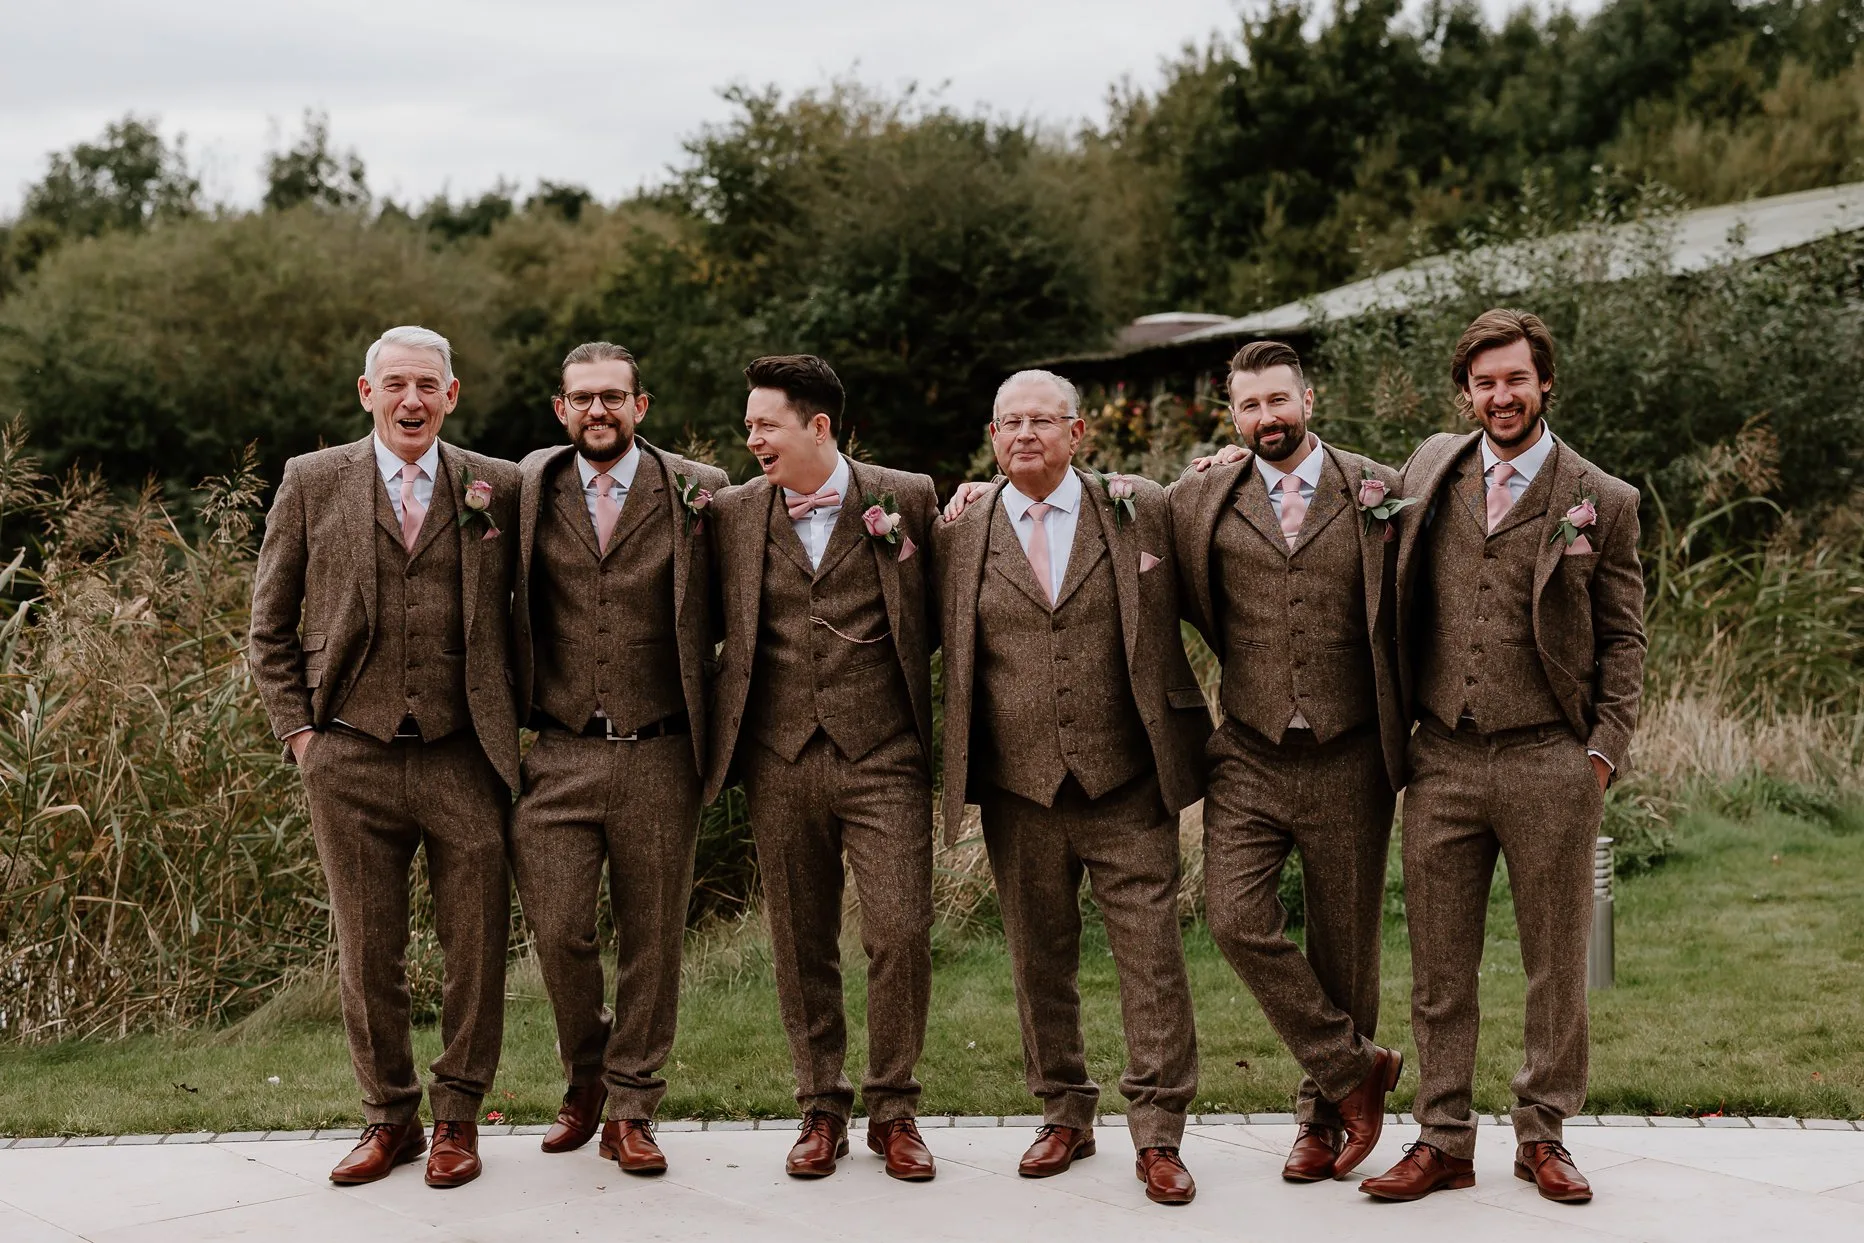 Natural photo of groom laughing and smiling with his groomsmen at Oaklands. They are all wearing matching brown tweed suits with baby pink ties and pocket squares.